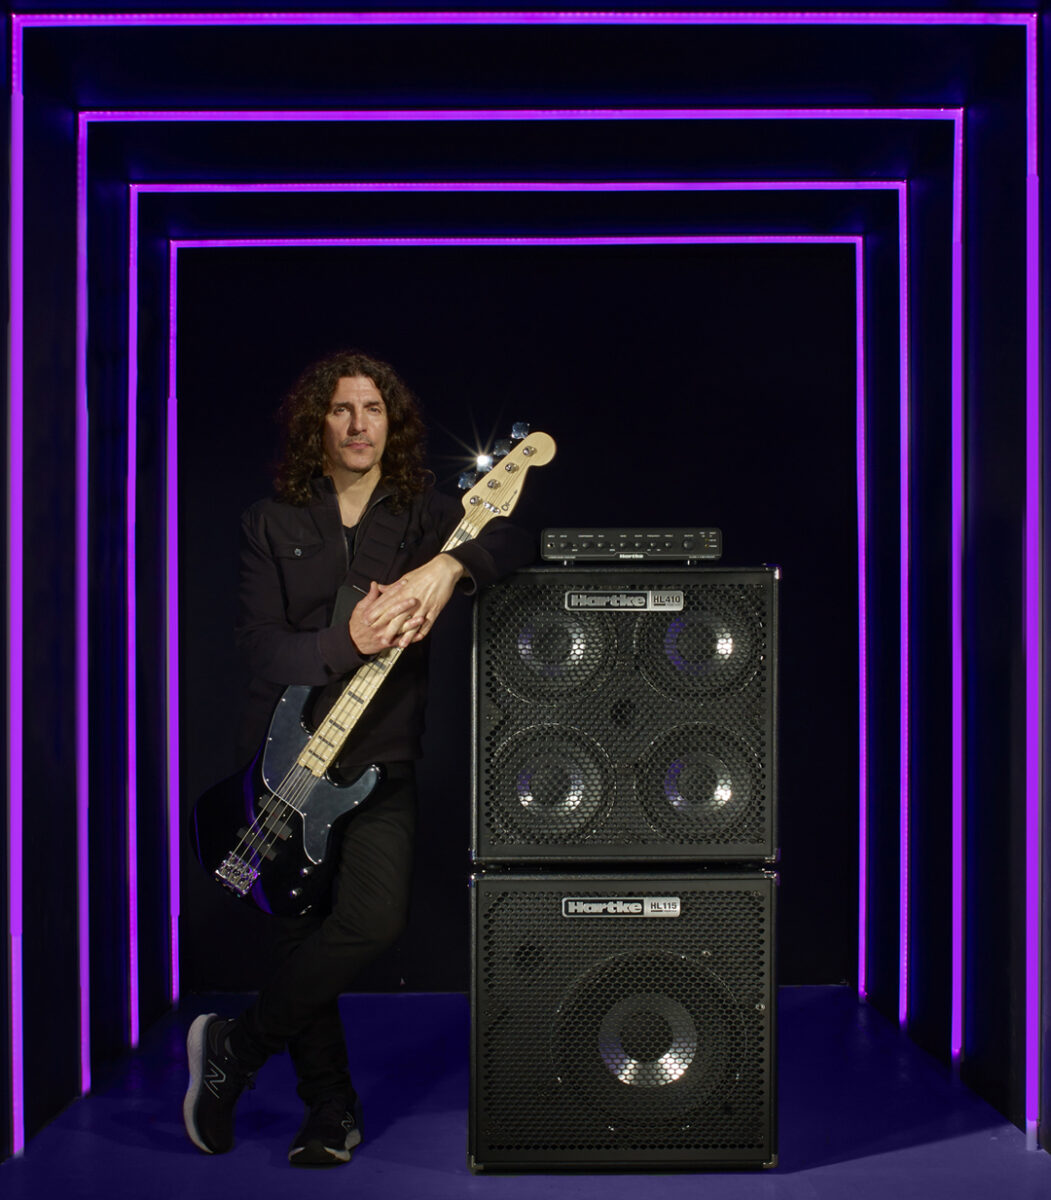 Man with curly hair standing and holding a bass guitar next to large speakers, framed by glowing neon lights.